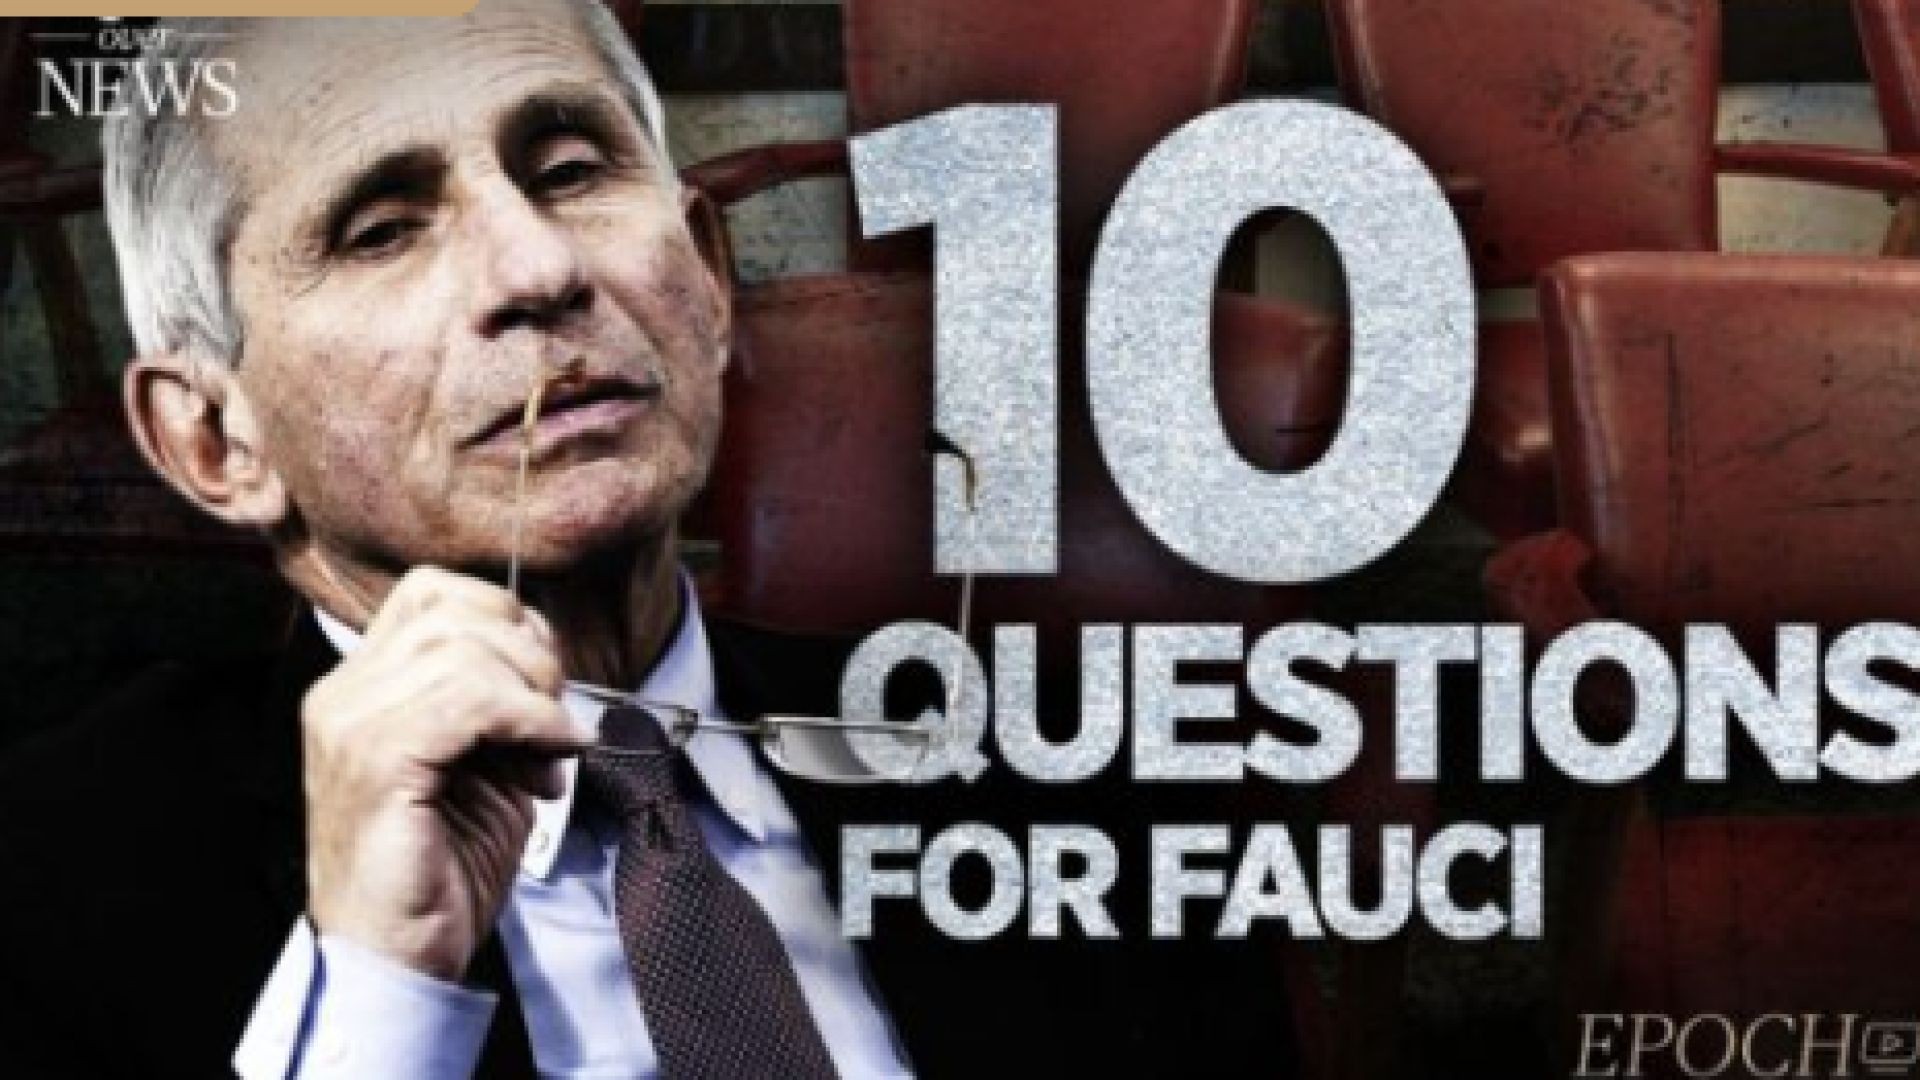 "Ten Questions For Fauci"      (documentary free viewing below)